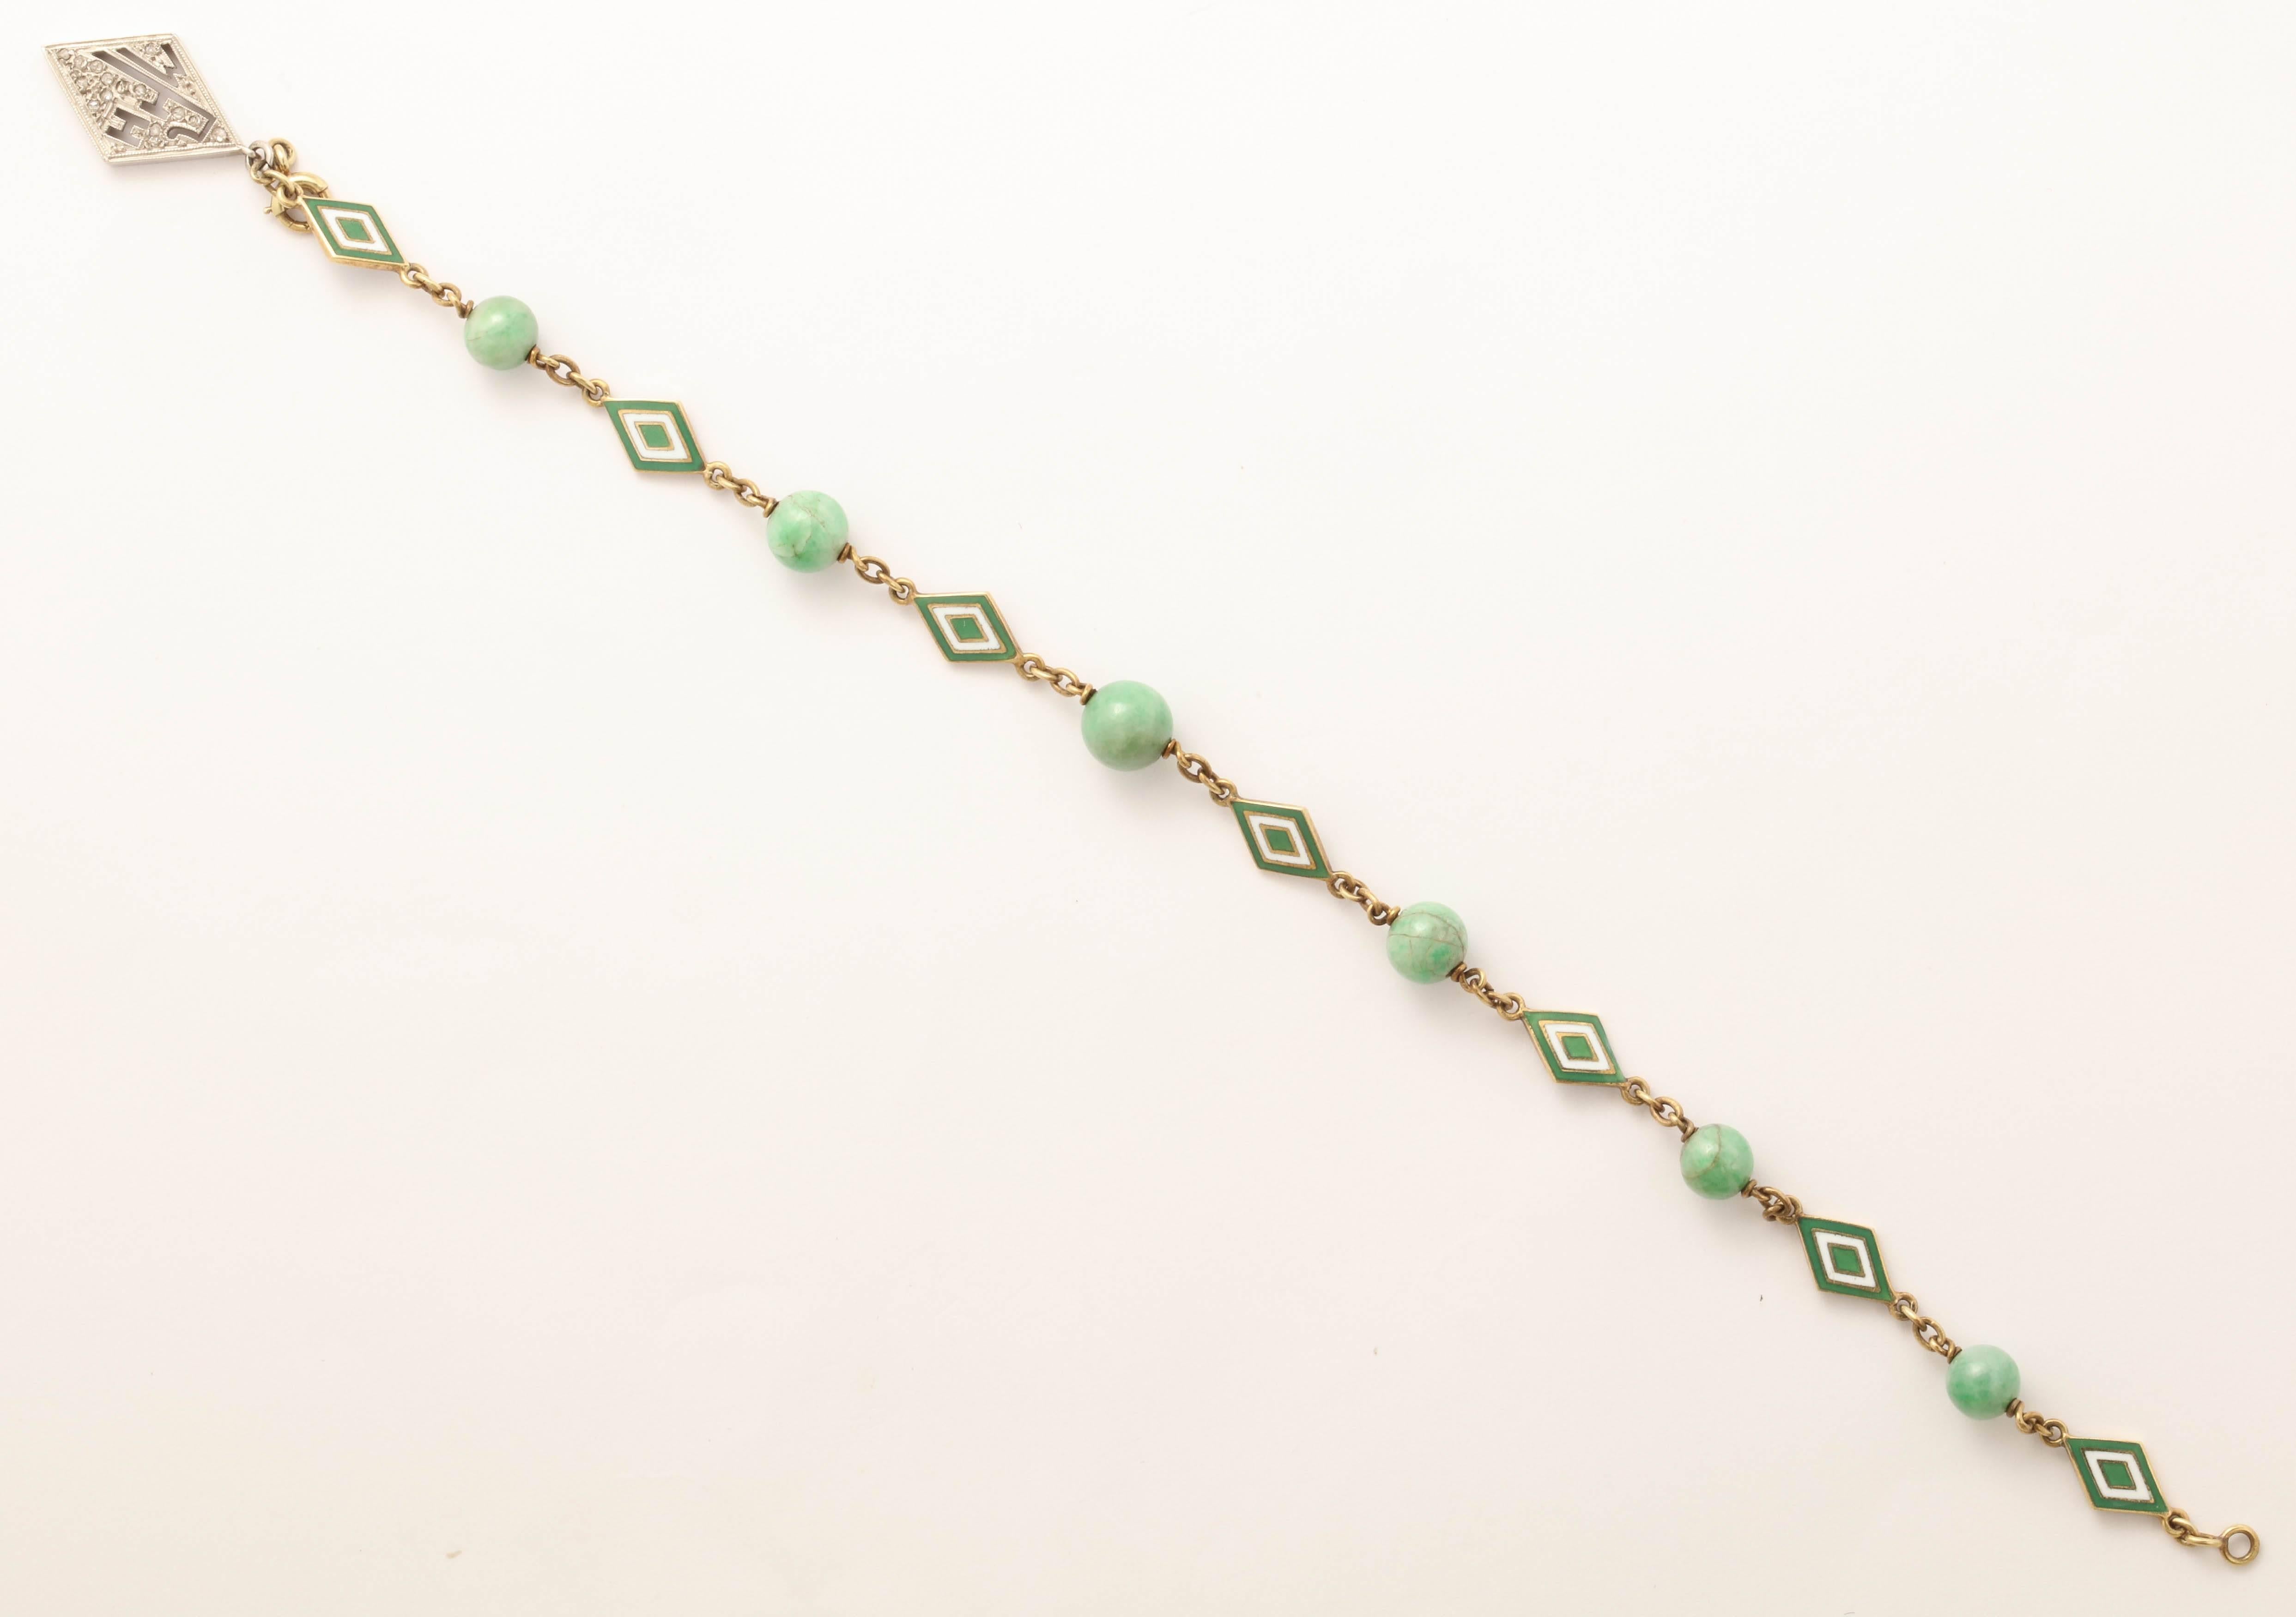 Apple jade beads alternate with lozenge shaped green and white enamel plaques. MHF initials on diamond charm- charm can be removed. 18K and platinum. 